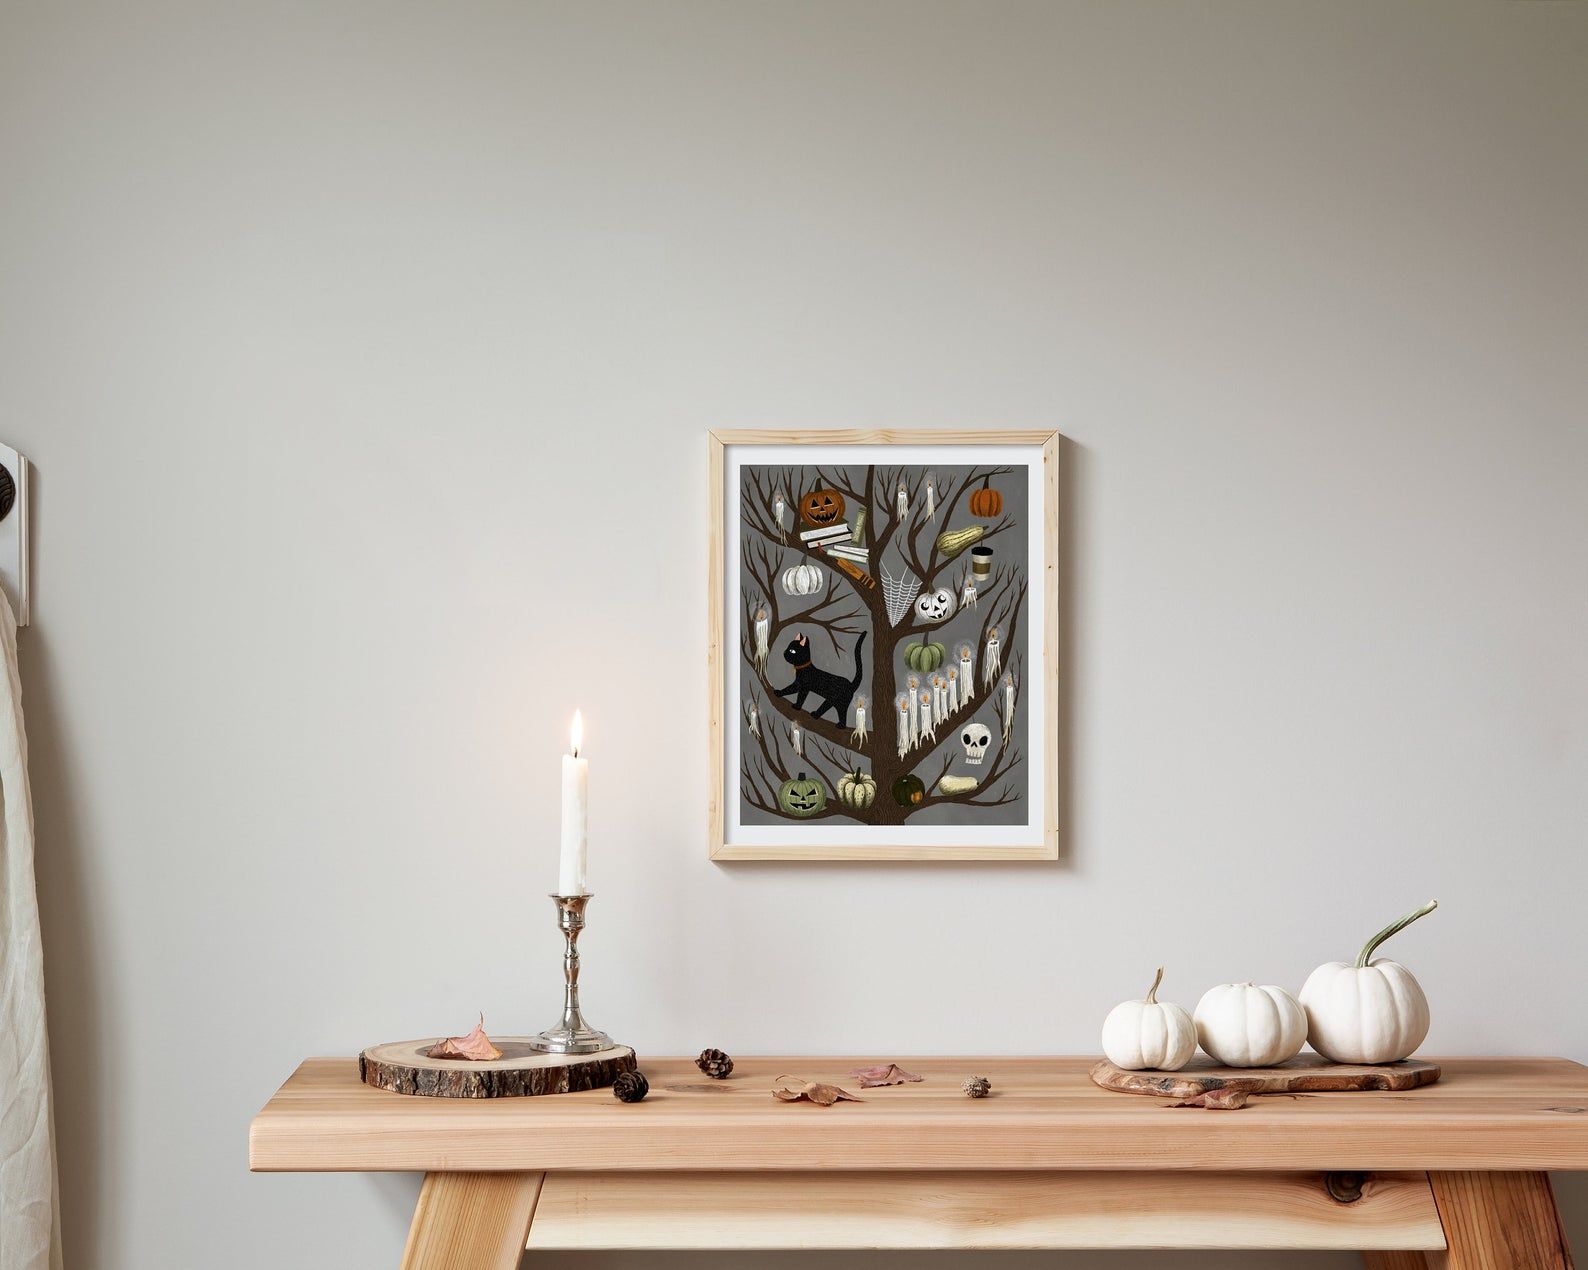 Image of spooky tree art, with branches featuring books, skeletons, ghosts, cats, and pumpkins.